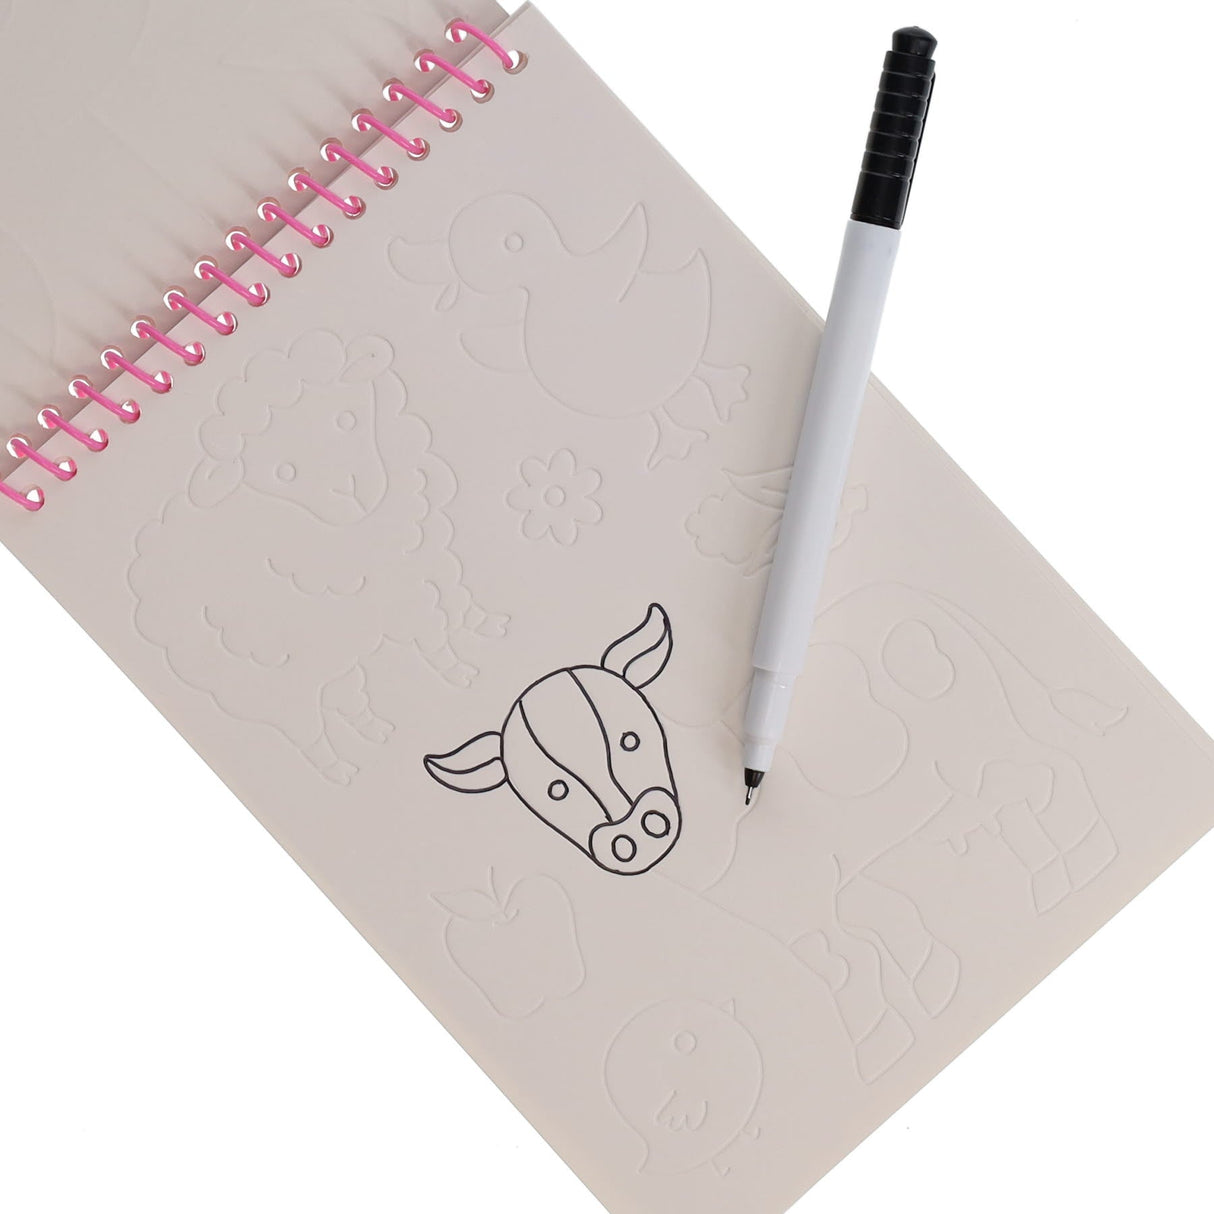 World of Colour Learn-To-Draw Sketch Pad - Unicorn-Activity Books-World of Colour|StationeryShop.co.uk